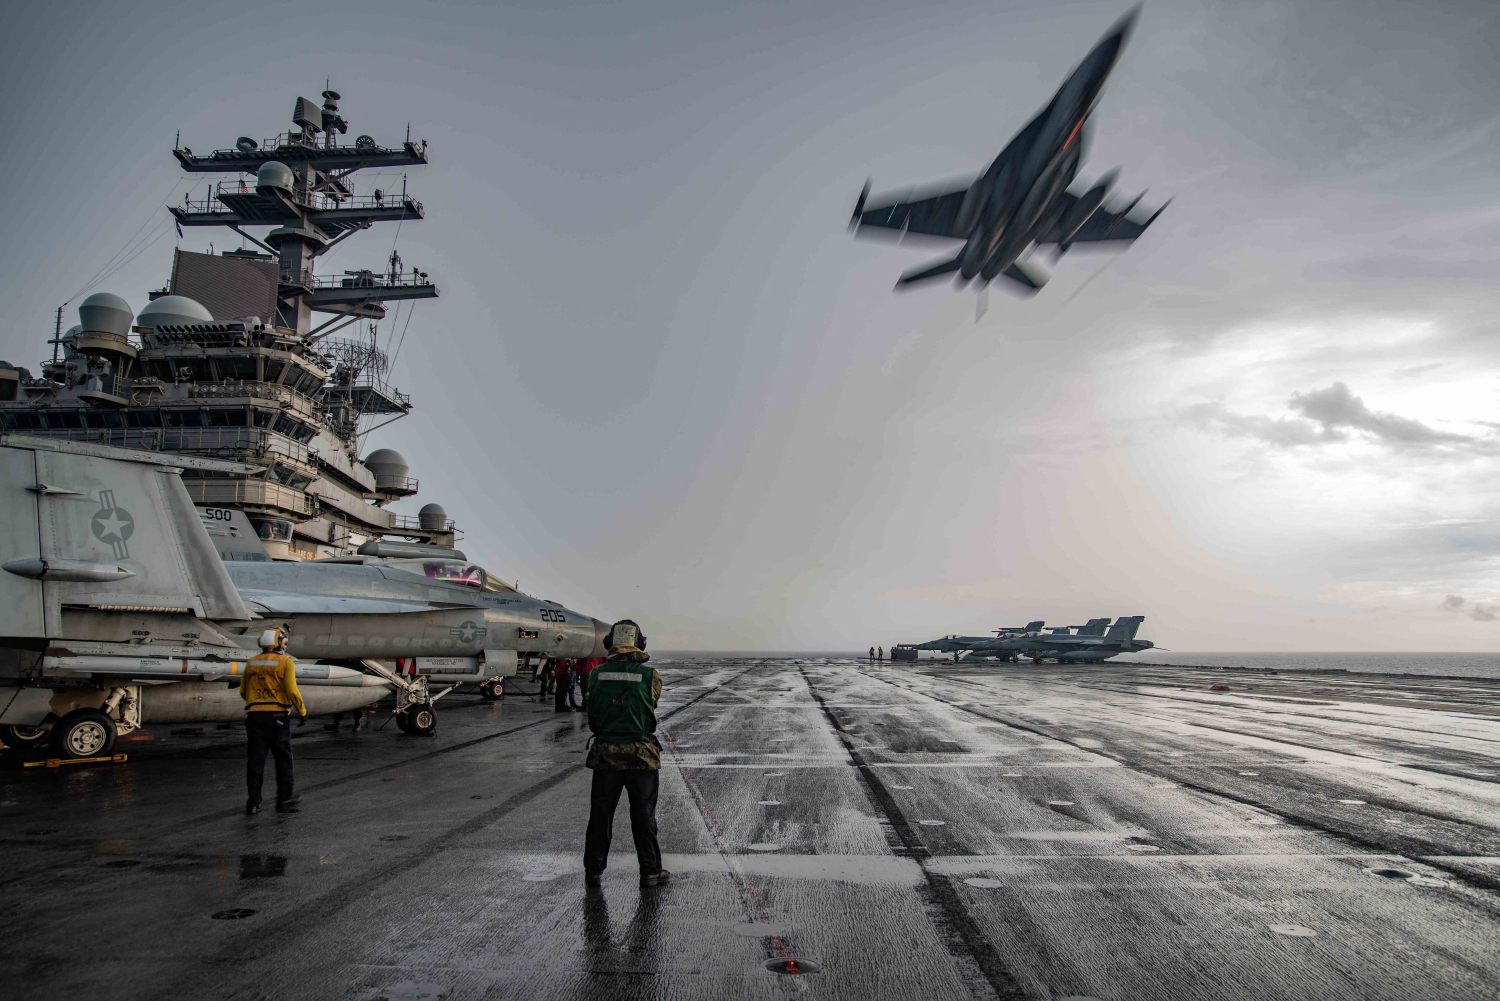 Hand out photo dated July 4, 2020 of an F/A-18E Super Hornet flies over the flight deck of the Navys only forward-deployed aircraft carrier USS Ronald Reagan (CVN 76), maintaining Ronald Reagans tactical presence on the seas. Ronald Reagan is the flagship of Carrier Strike Group (CSG) 5. Two US aircraft carriers have carried out drills in the South China Sea, a US Navy spokesman said Saturday, after the Pentagon expressed concerns over Chinese military exercises around a disputed archipelago. The USS Nimitz and USS Ronald Reagan conducted dual carrier operations in the waterway to "support a free and open Indo-Pacific," the spokesman said. China's expanding military presence in the contested waters has worried several of its neighbours. U.S. Navy photo by Mass Communication Specialist 2nd Class Samantha Jetzer via ABACAPRESS.COM